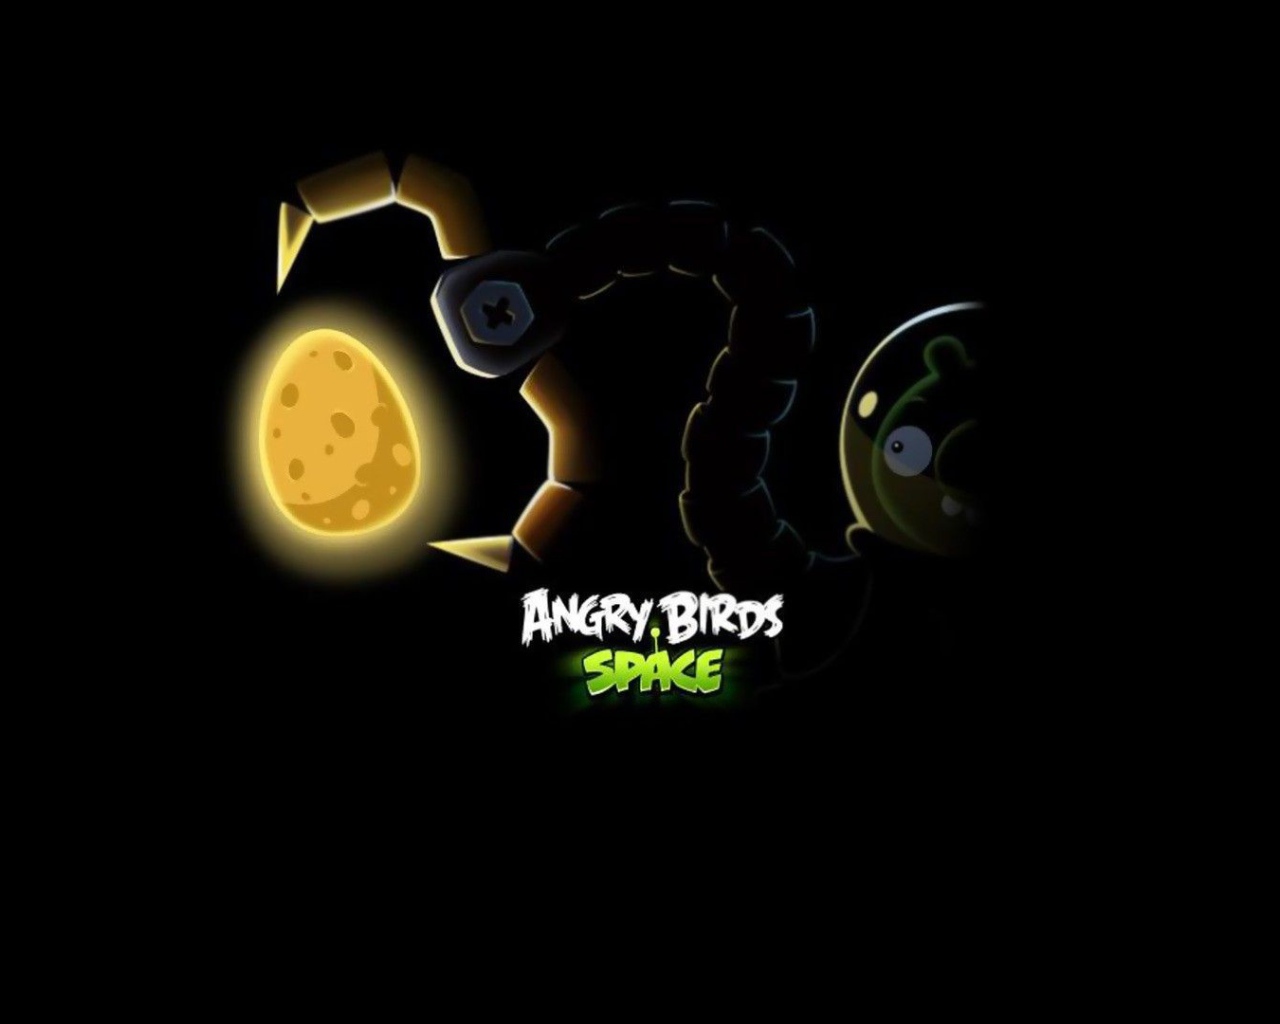 The new game Angry Birds Space